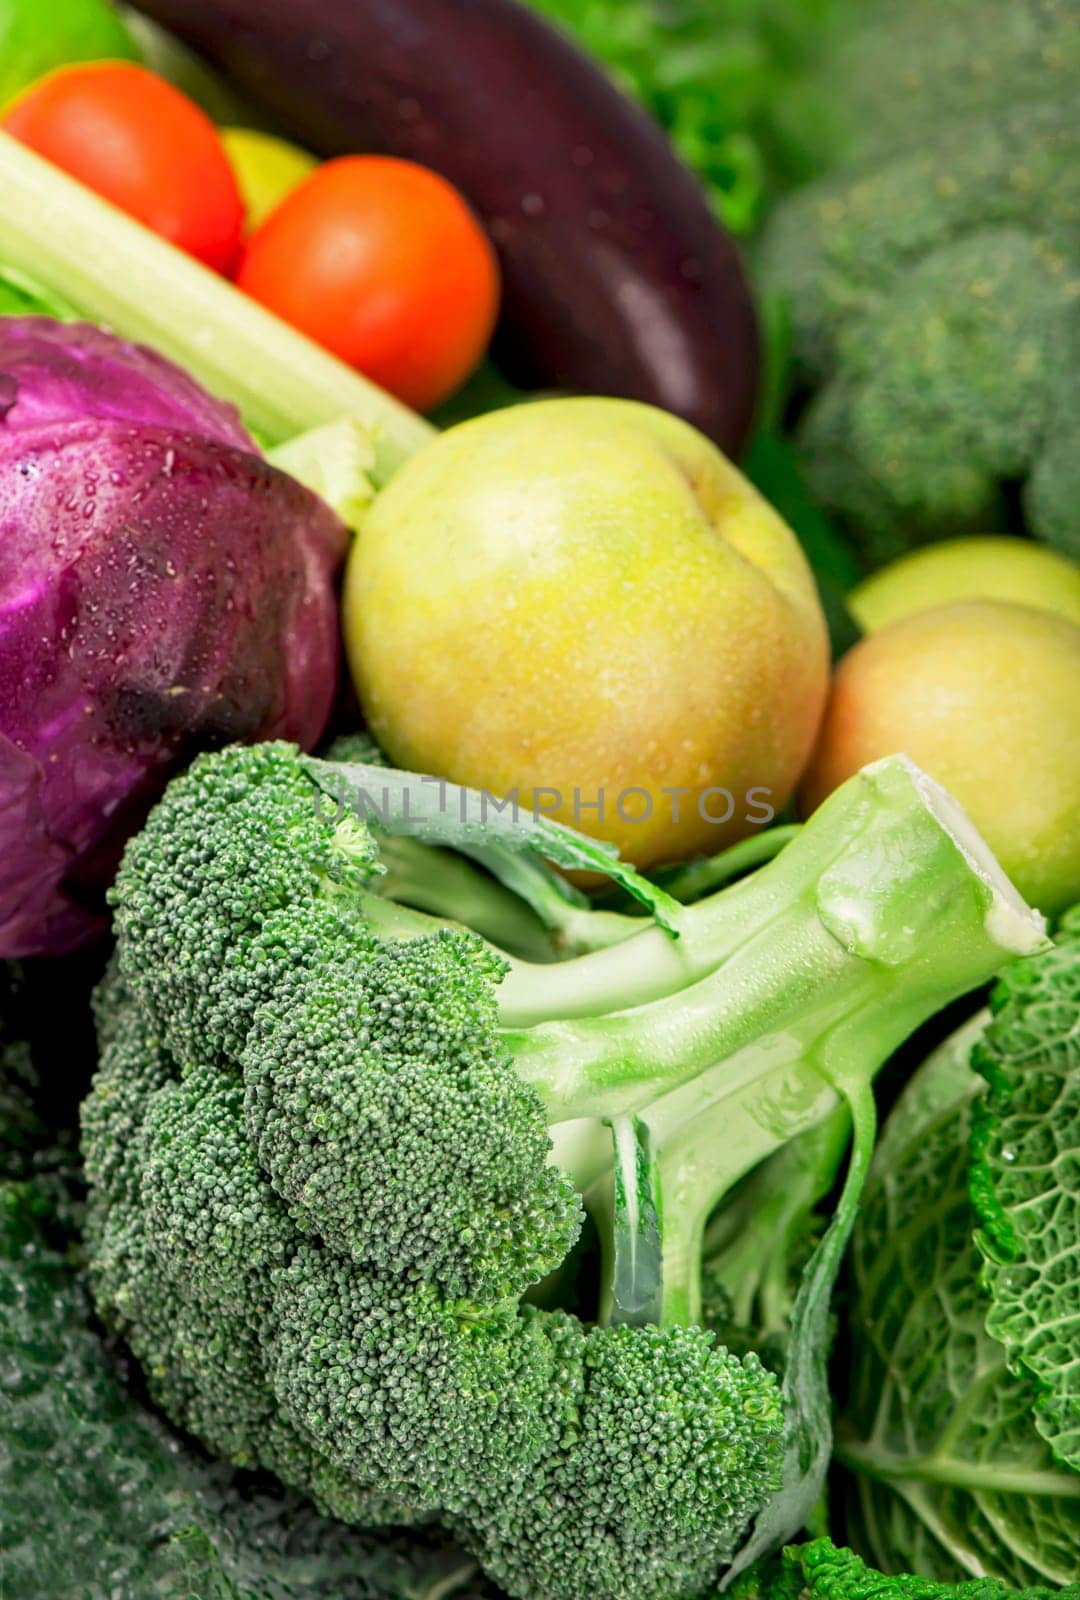 Broccoli and other fresh green vegetables make up a colorful food background by aprilphoto